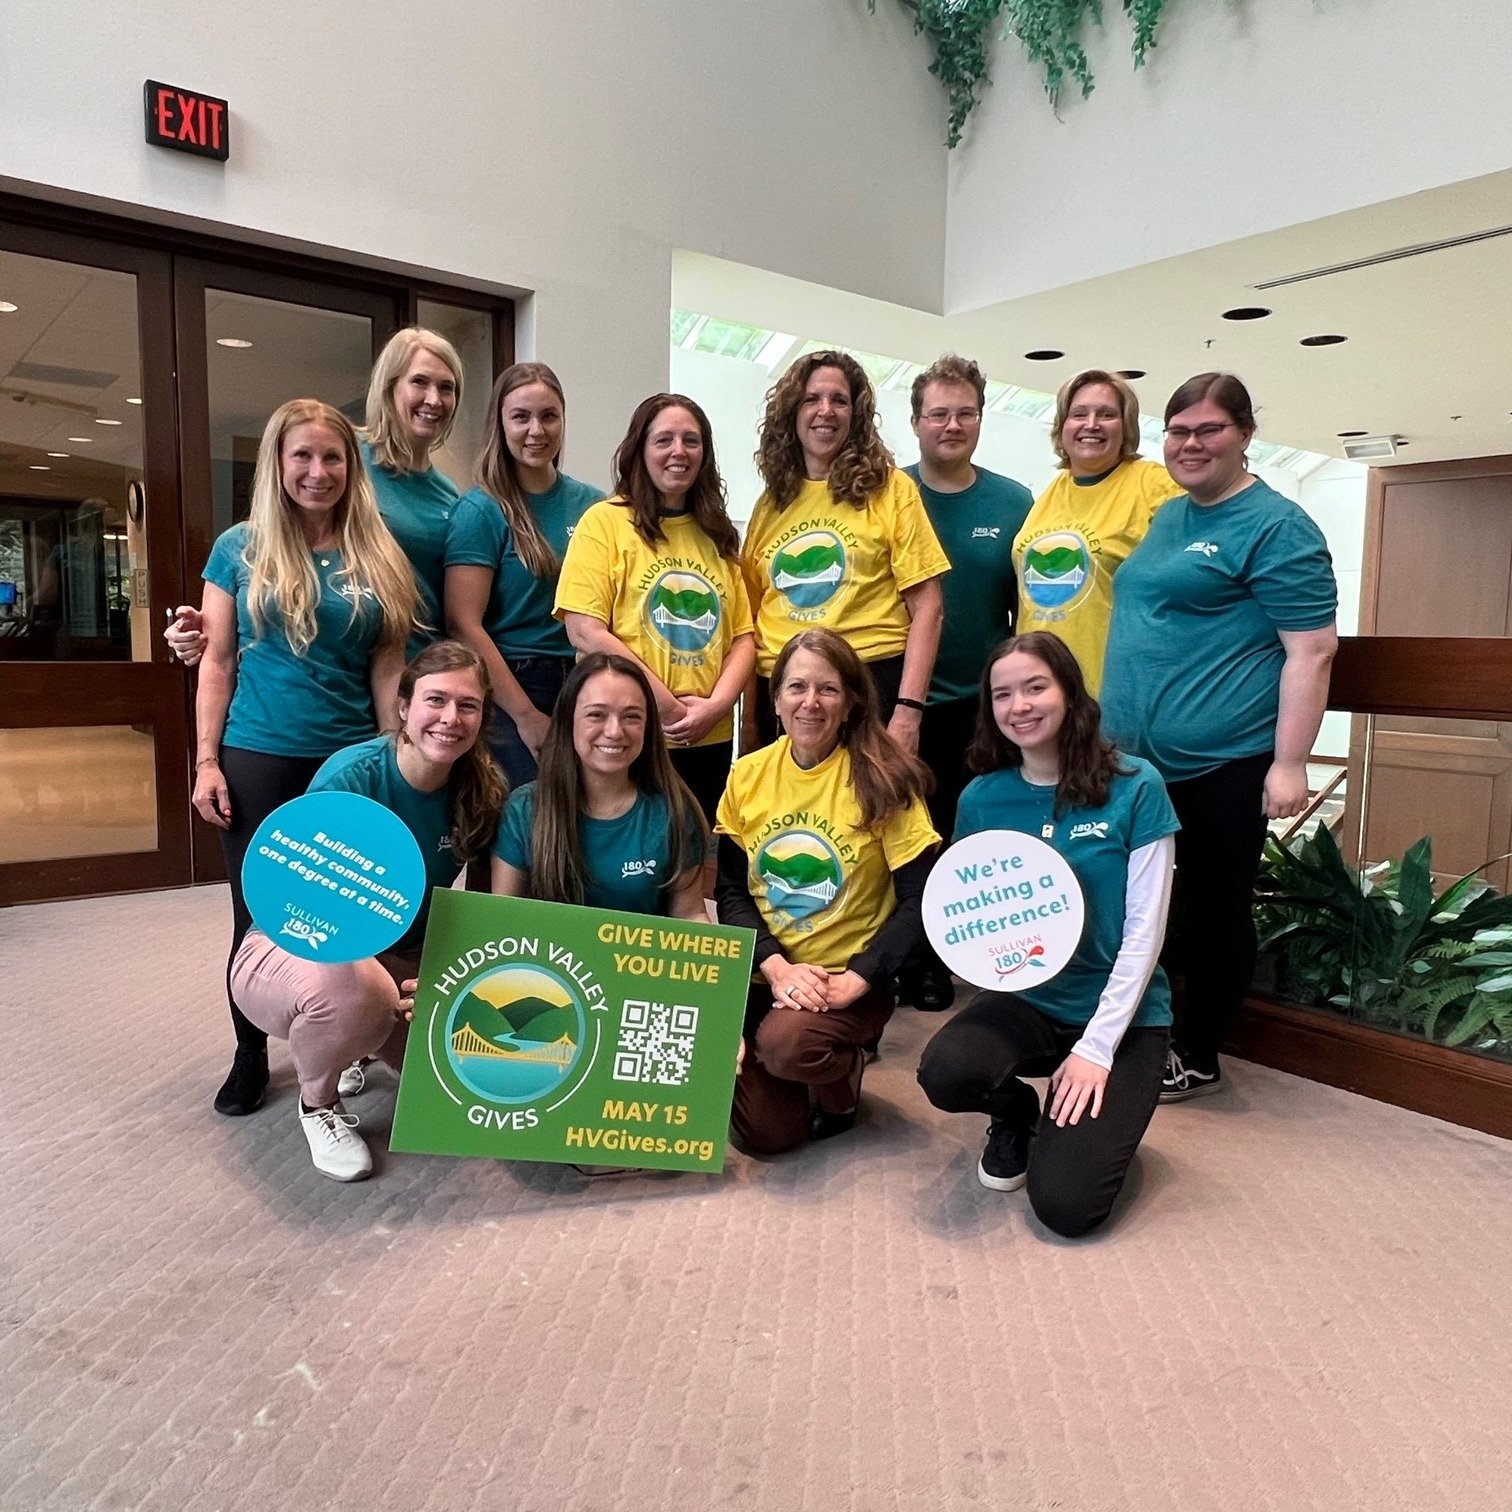 @hvgives : 𝗔 𝗖𝗼𝗺𝗺𝗶𝘁𝘁𝗲𝗱 𝗧𝗲𝗮𝗺

Pictured here is a team committed to making Sullivan County a healthier place to live, learn, work, play, and raise a family. 

Today's fundraising efforts intentionally focus on our Healthiest Fire Departme